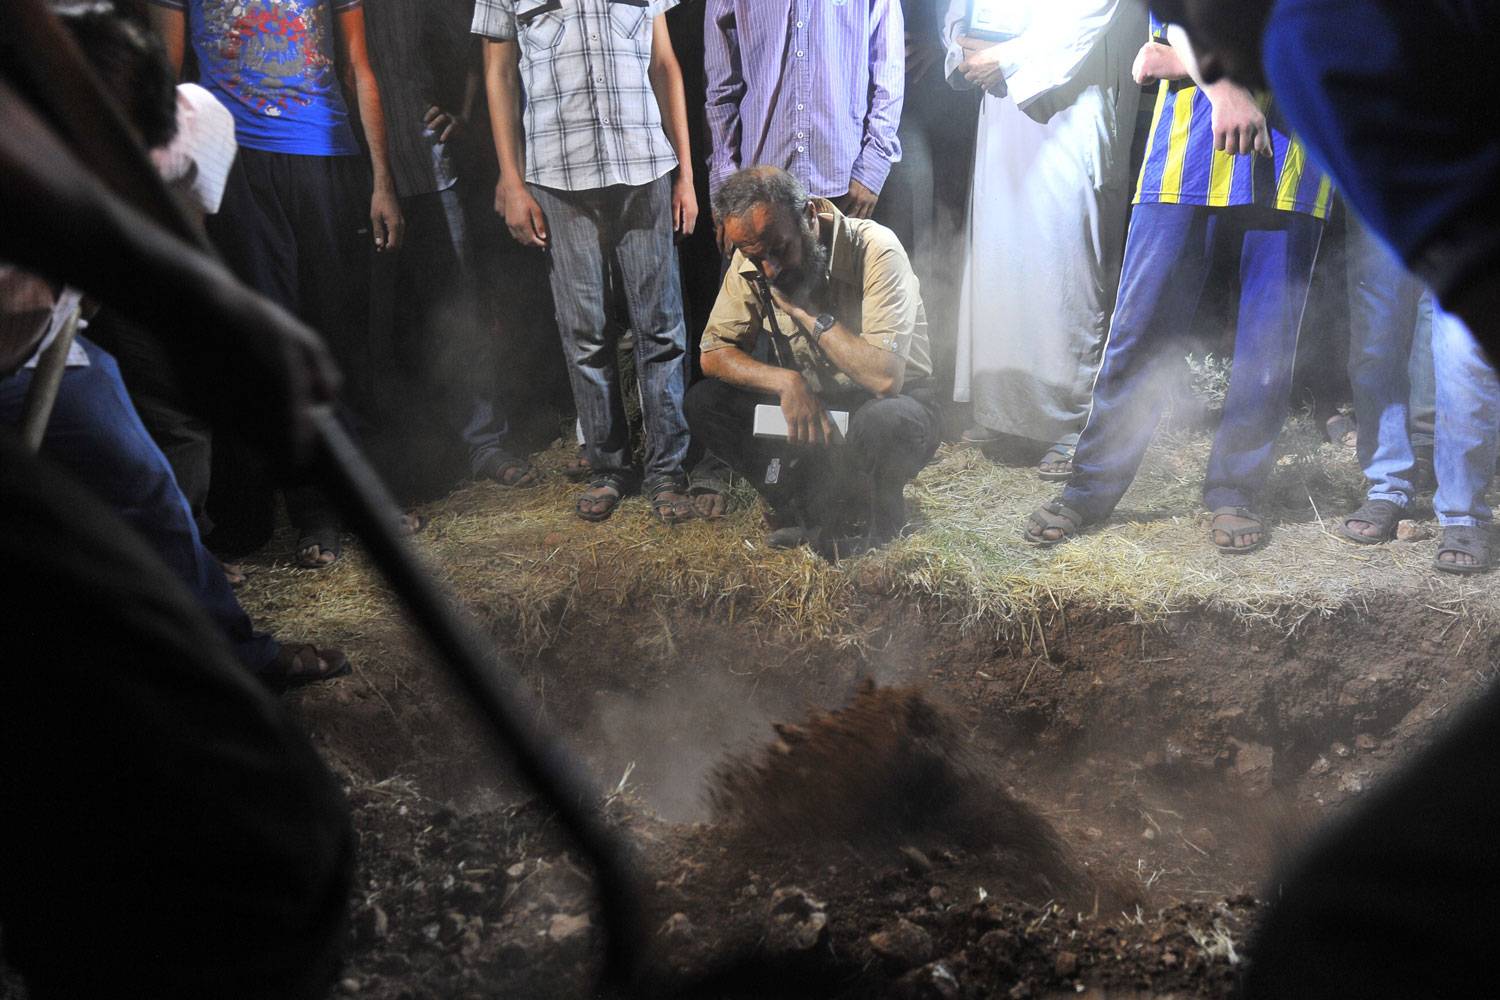 July 19, 2012. Syrians mourn during the funeral of 17-year-old Free Syrian army member Mahmud Derwish.